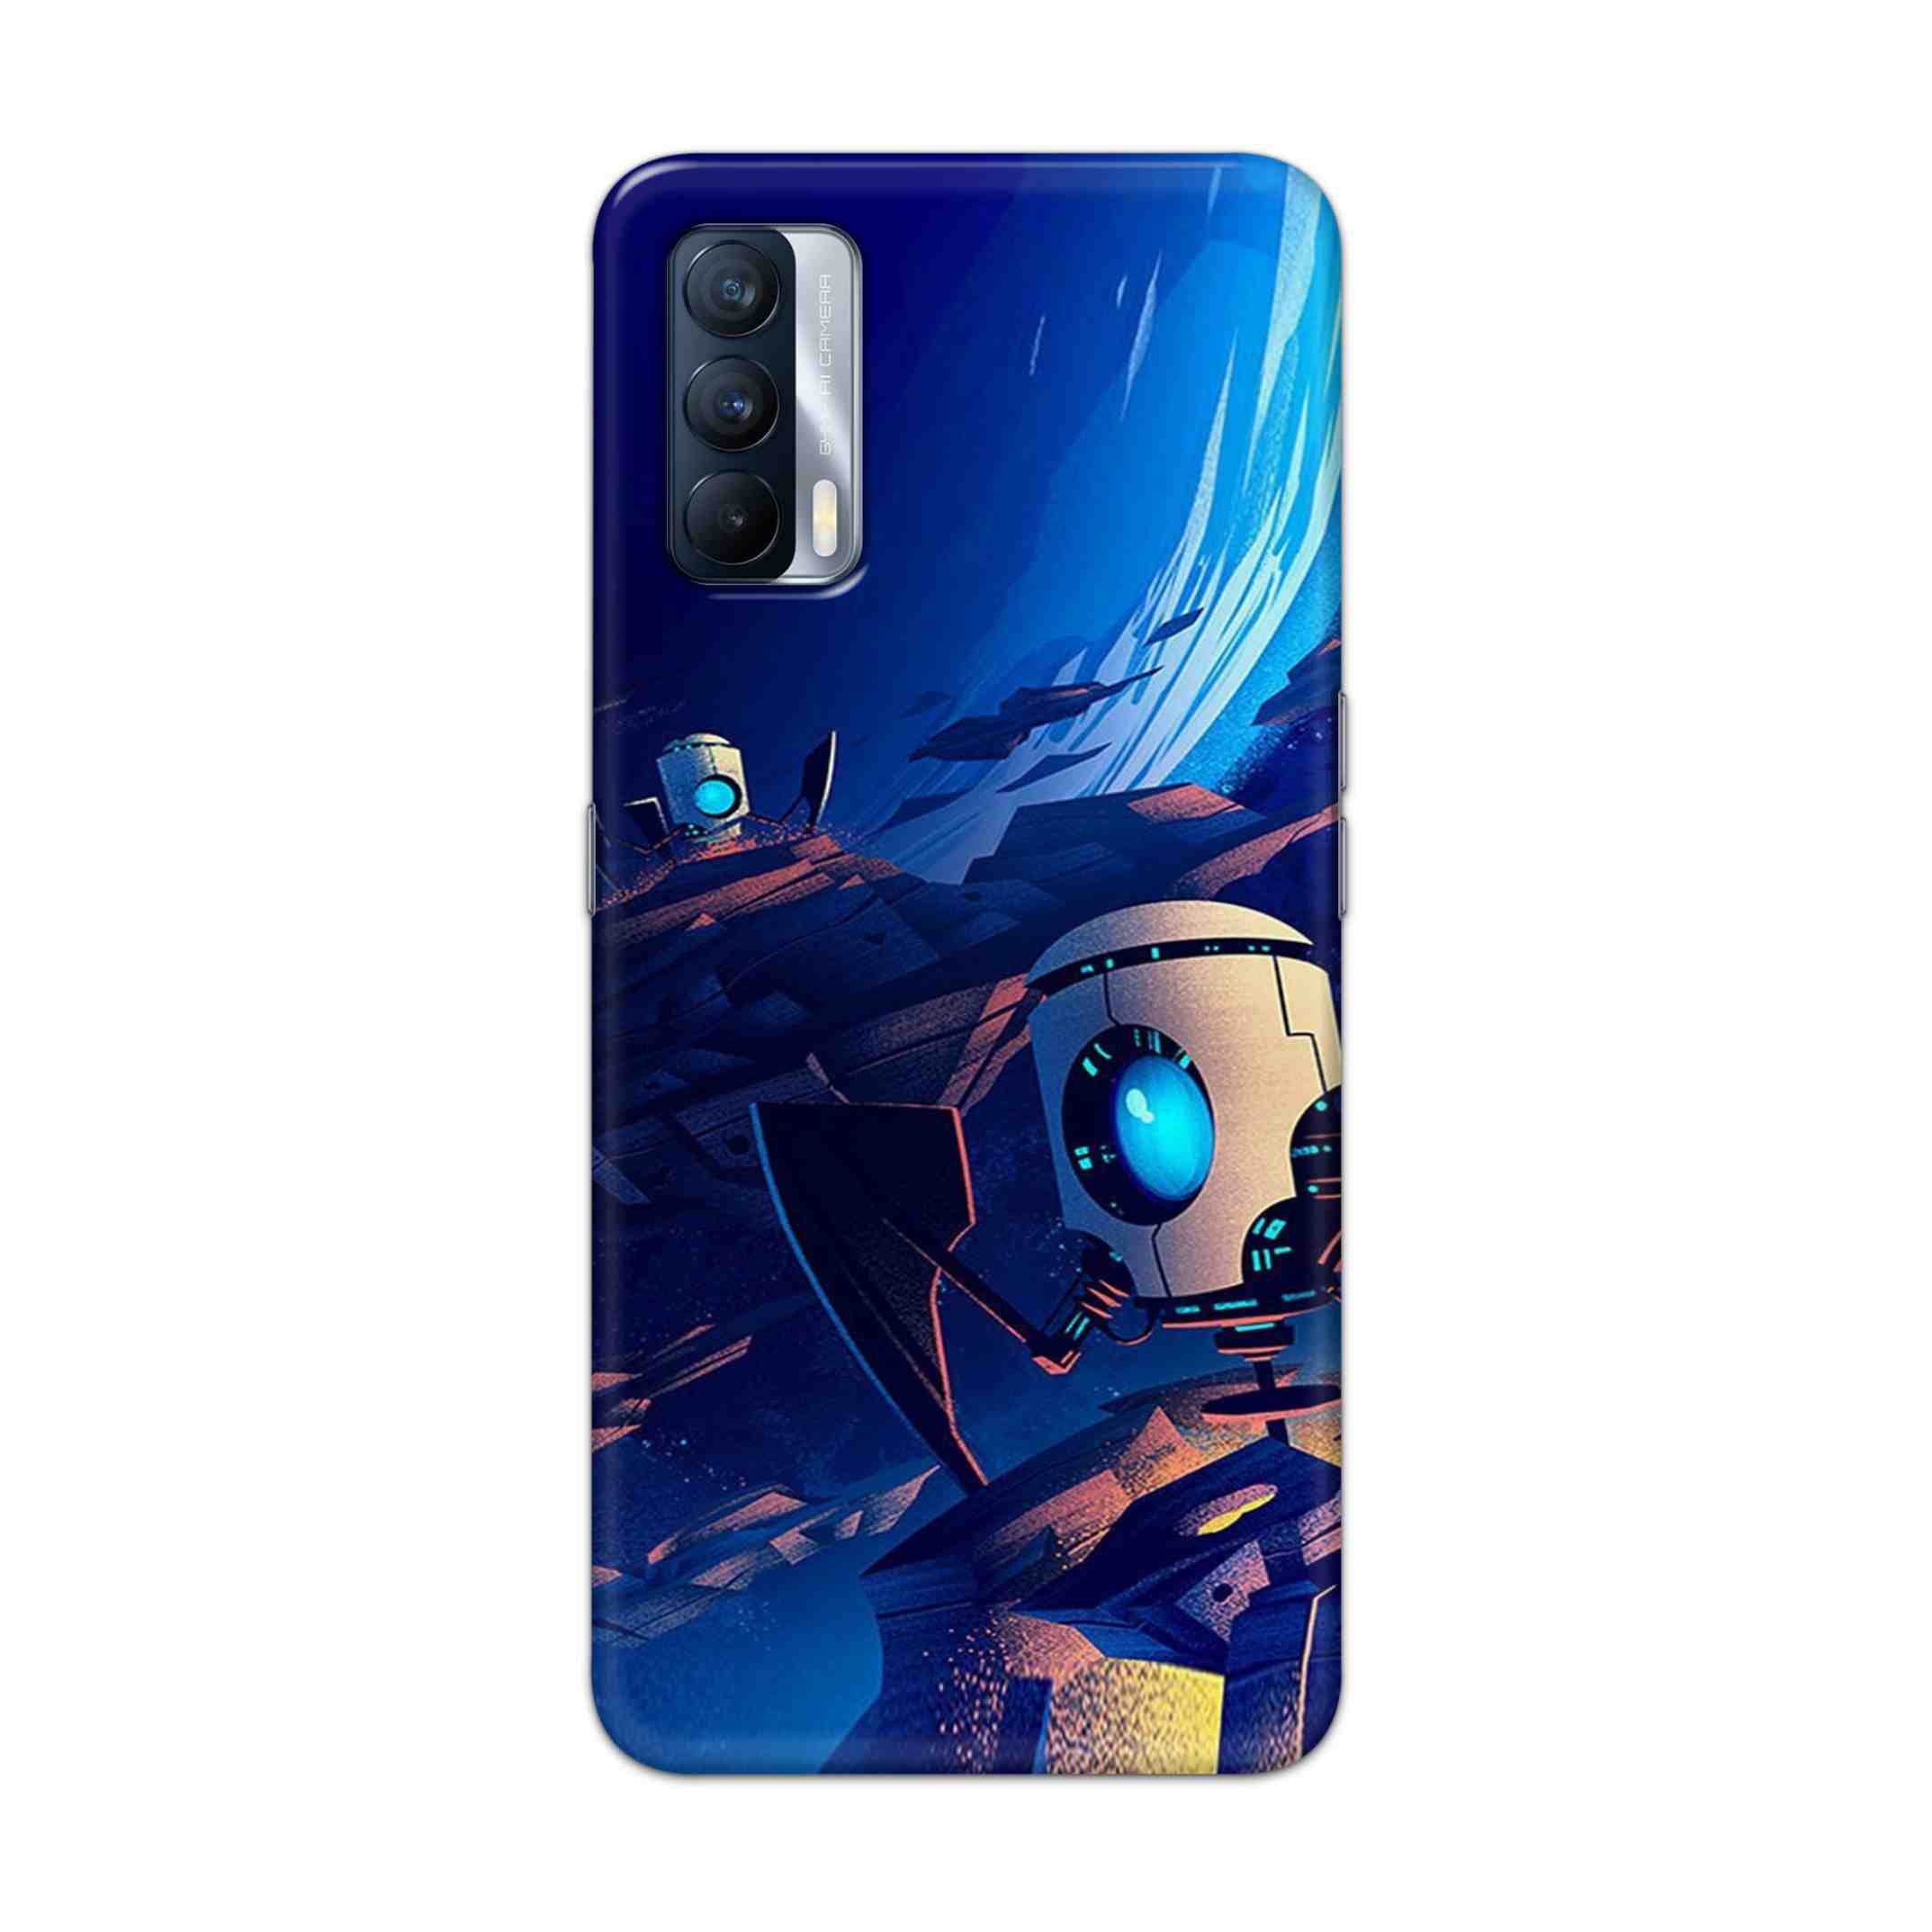 Buy Spaceship Robot Hard Back Mobile Phone Case Cover For Realme X7 Online